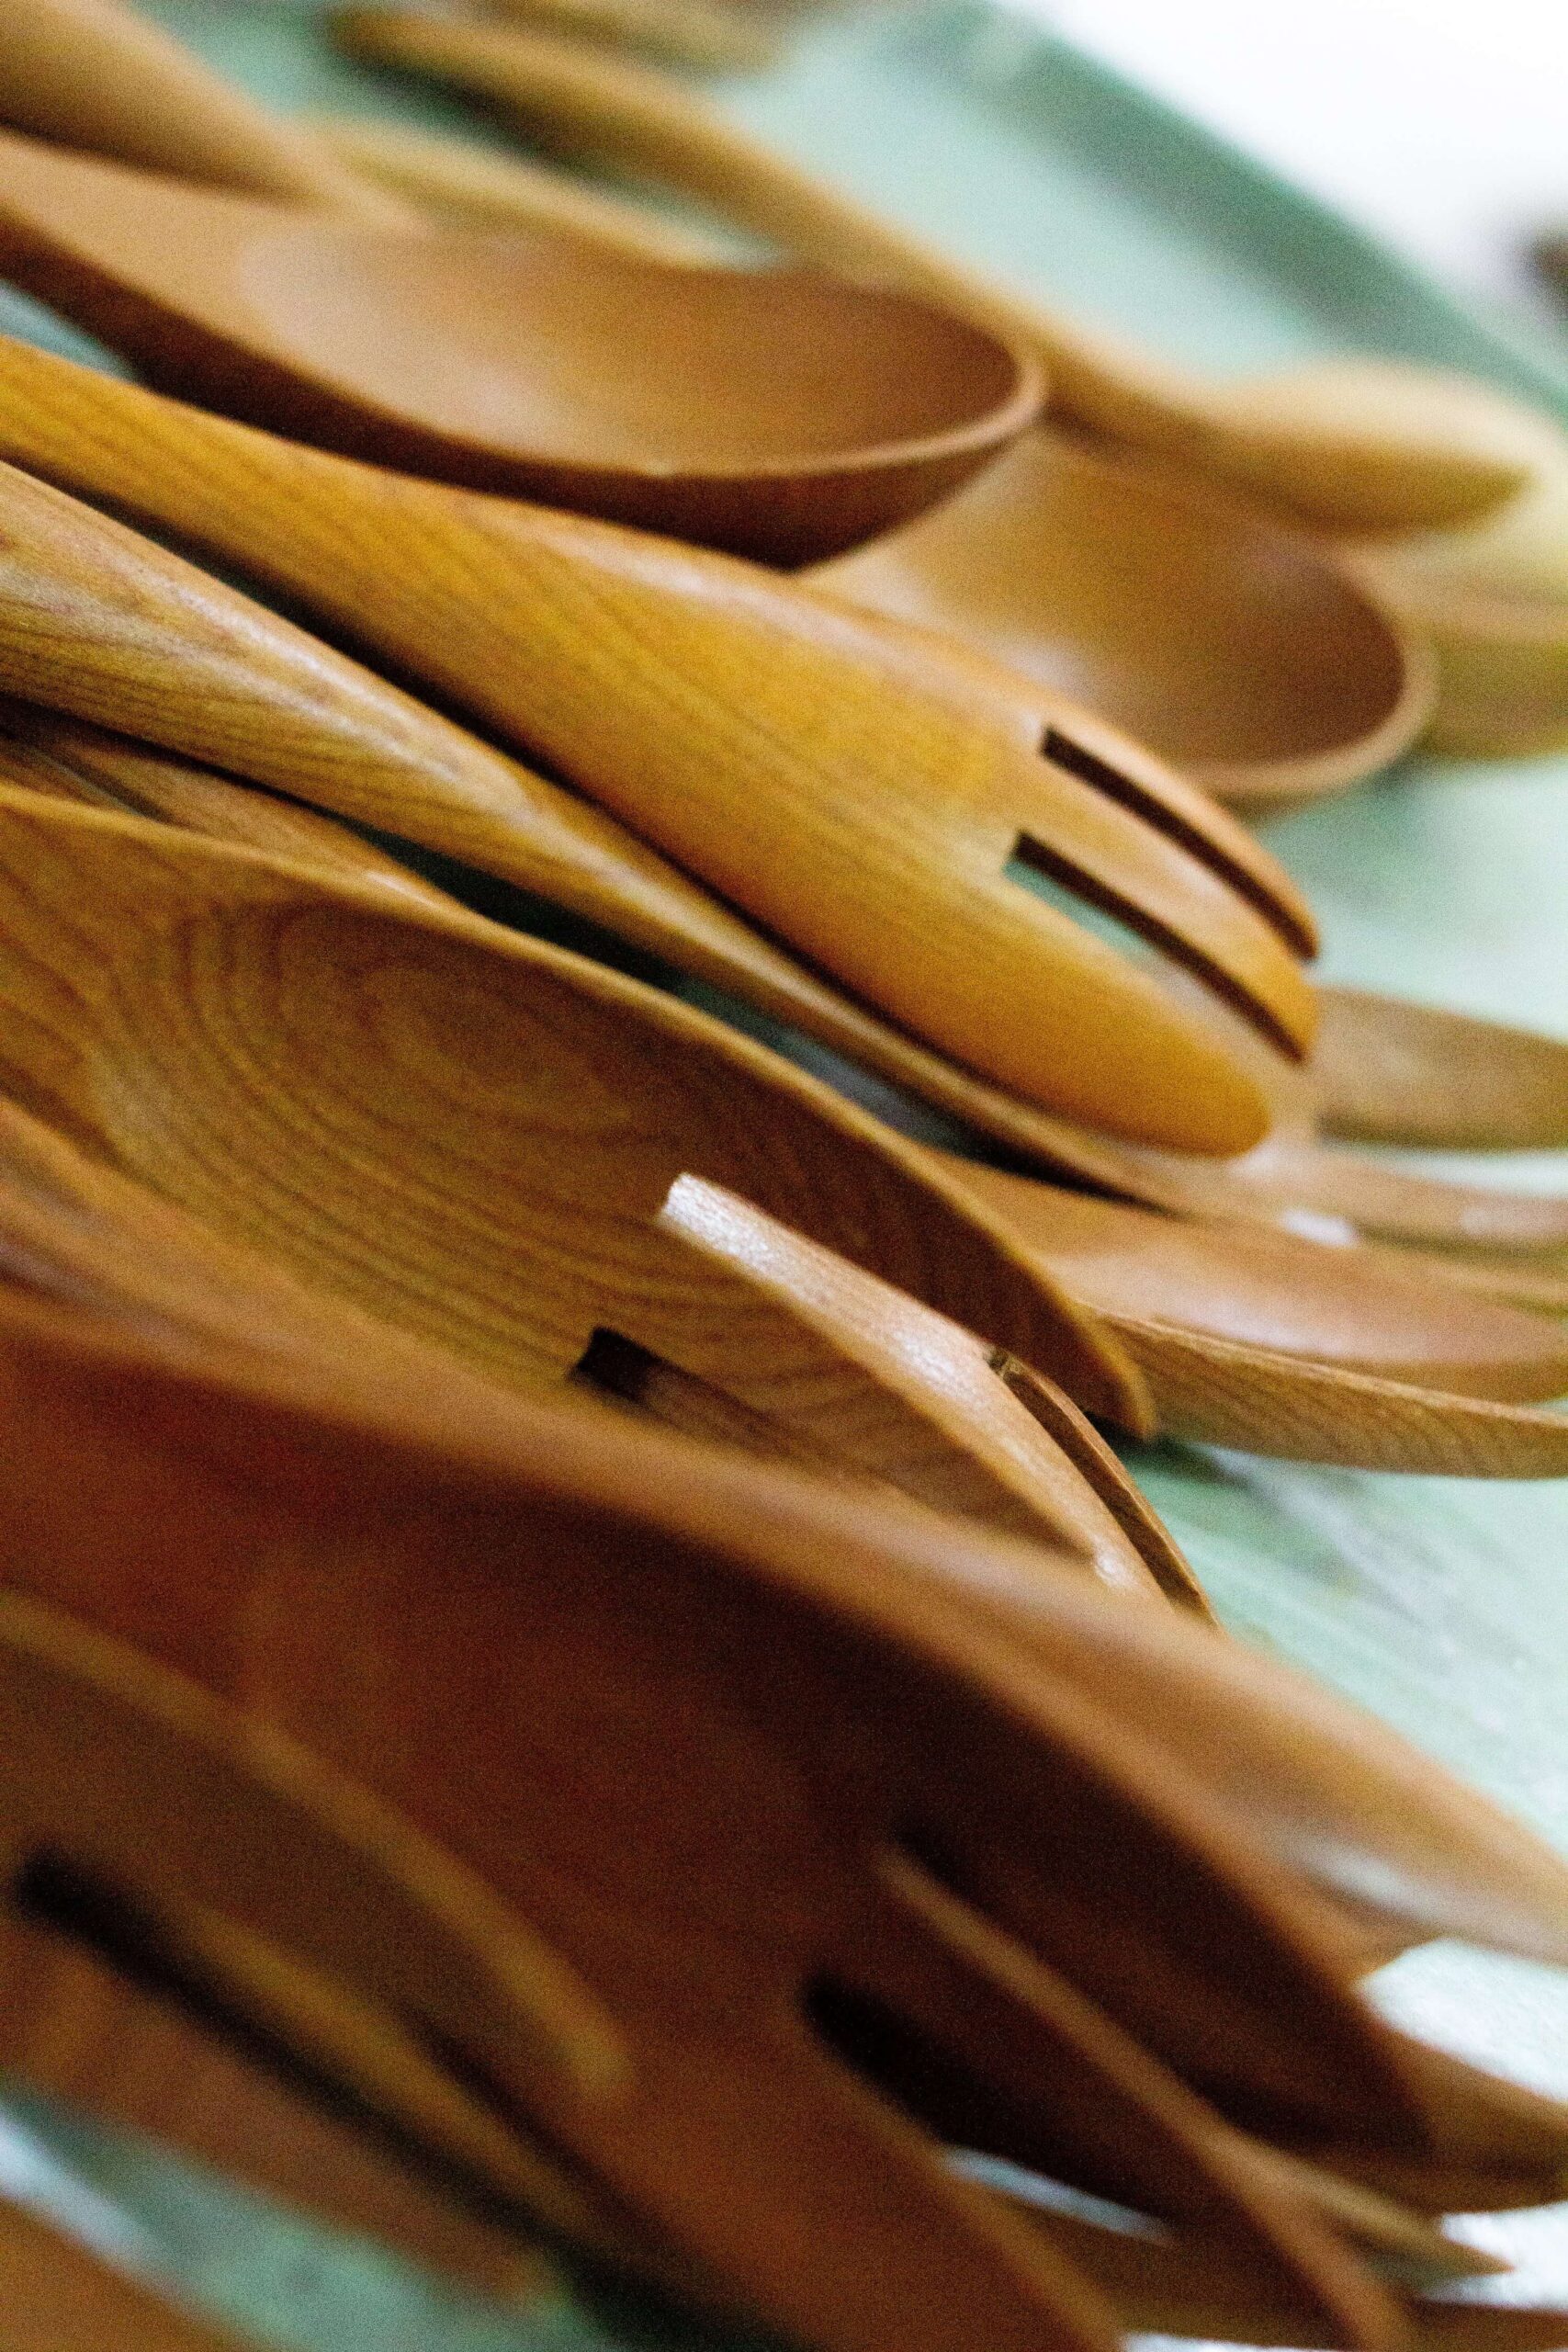 wooden forks, spoons and serving dishes